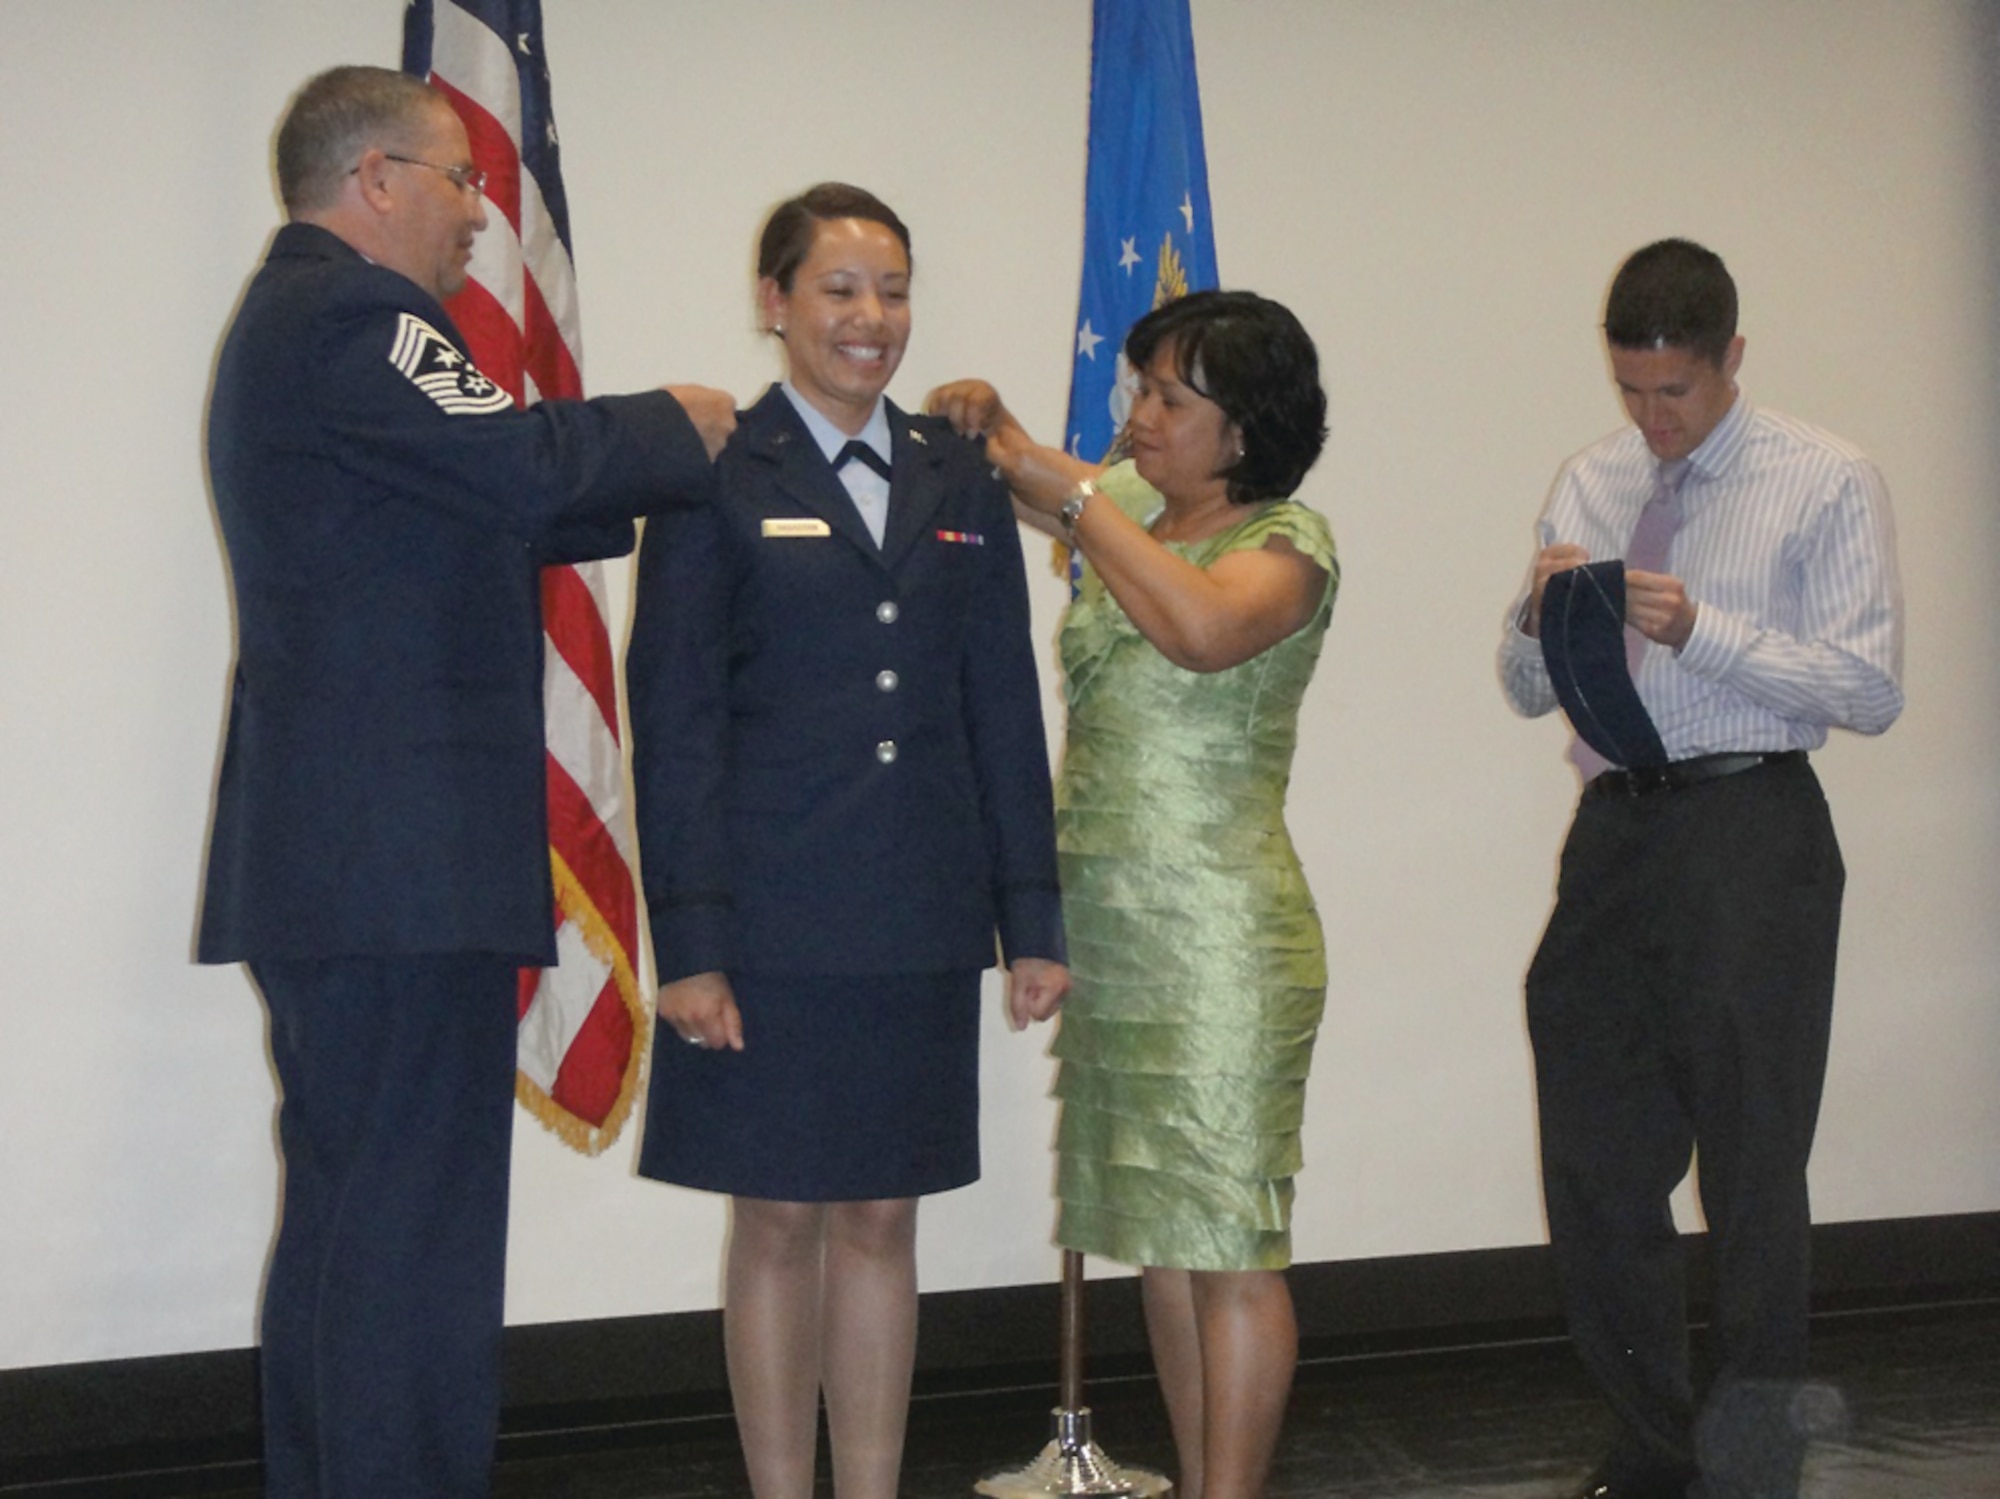 65th Air Base Wing Command Chief Samuel Hagadorn and his wife, Loida, pin second lieutenant bars on daughter Shannon Hagadorn at an AFROTC commissioning ceremony May 14 at the University of Arizona in Tucson.  (Courtesy photo)